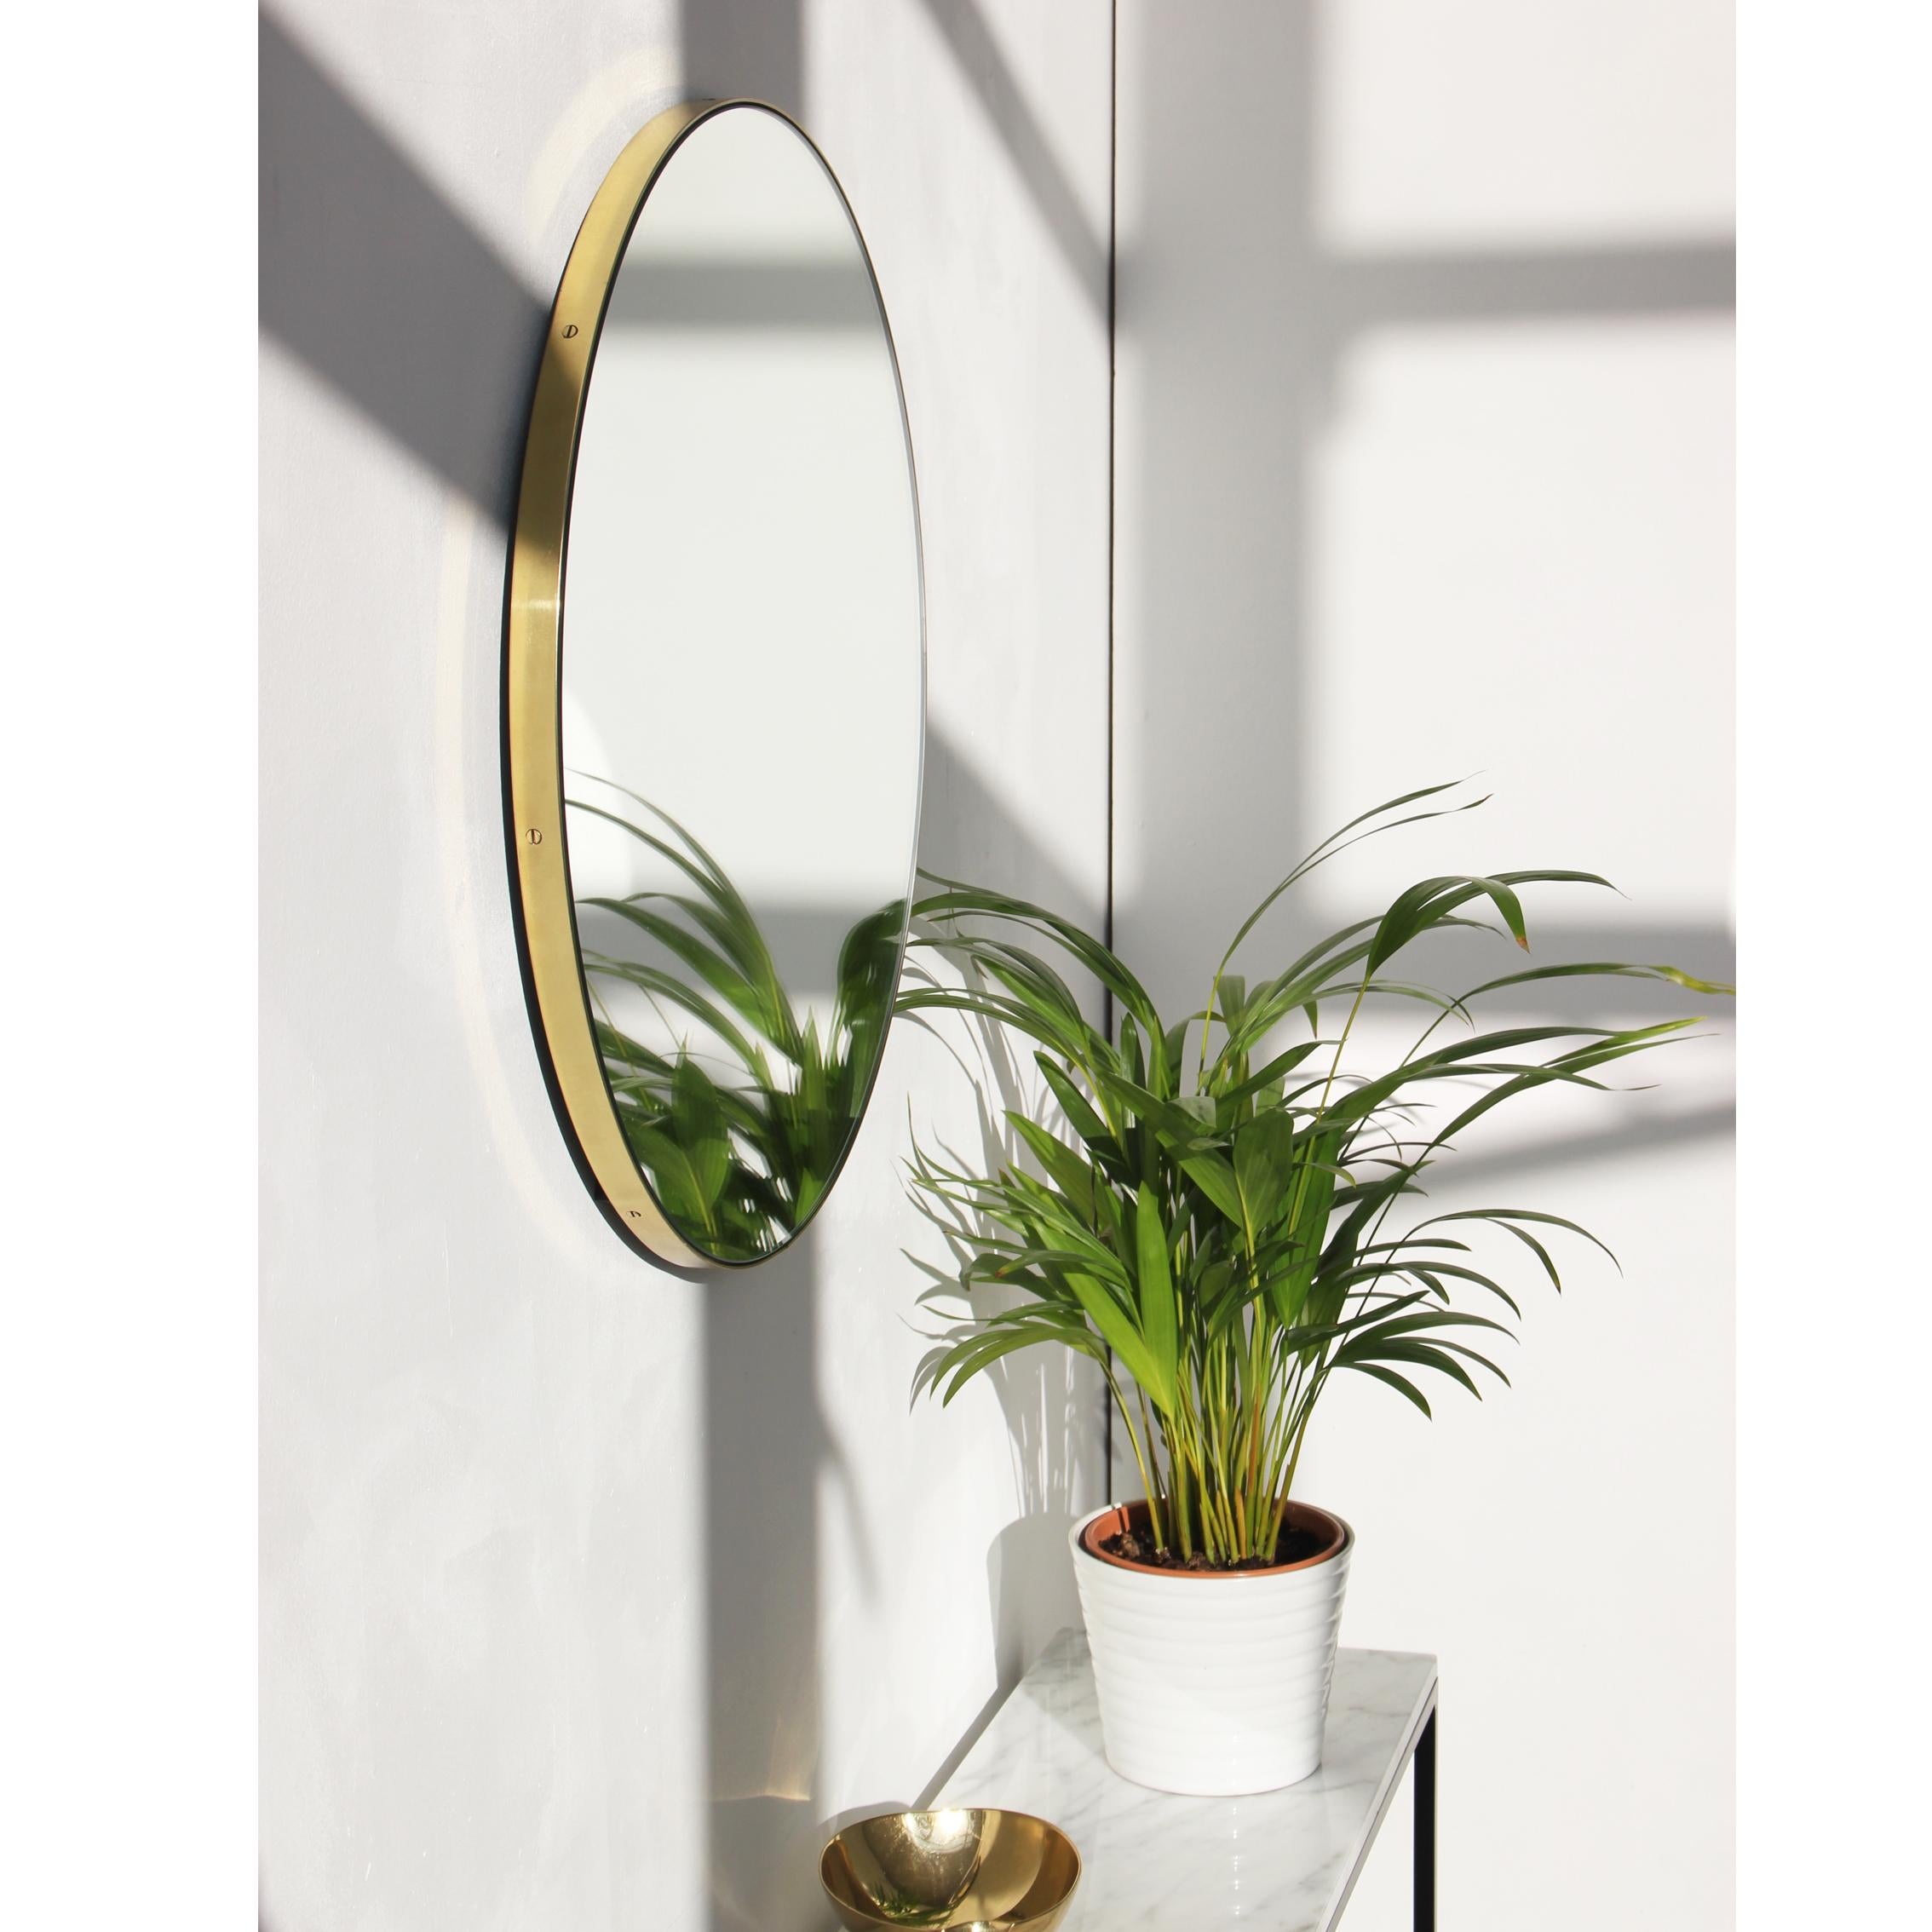 Orbis Round Minimalist Contemporary Mirror with a Brass Frame, Medium In New Condition For Sale In London, GB